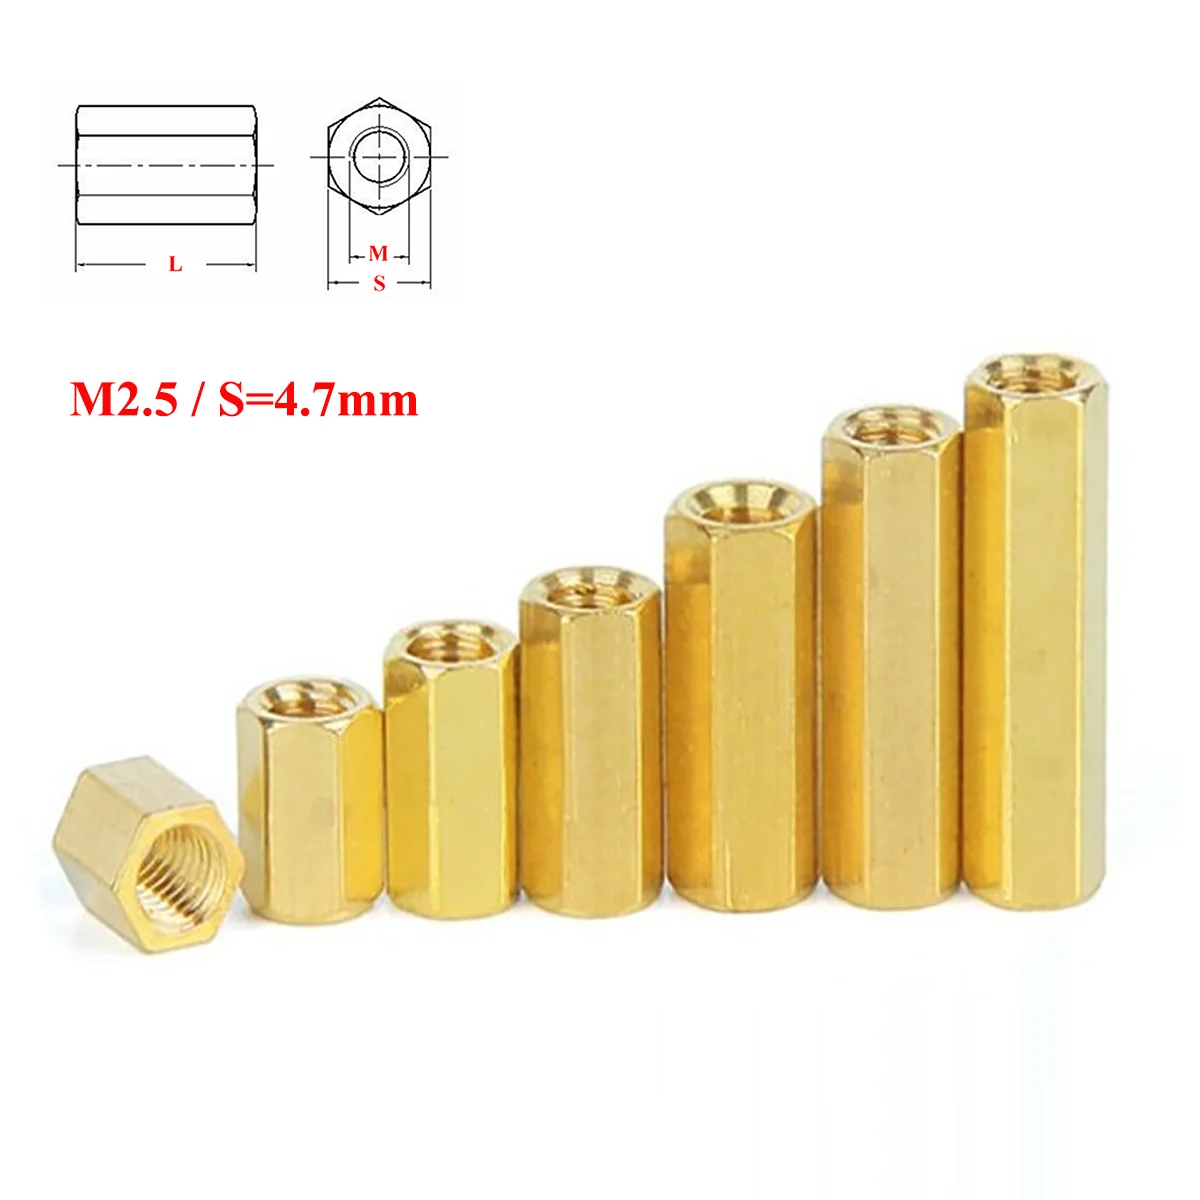 

10pcs M2.5 / S=4.7mm Brass Hex Standoff Pillars Hexagon Female Threaded Studs Sleeving PCB Motherboard Spacer Nuts Hollow Column